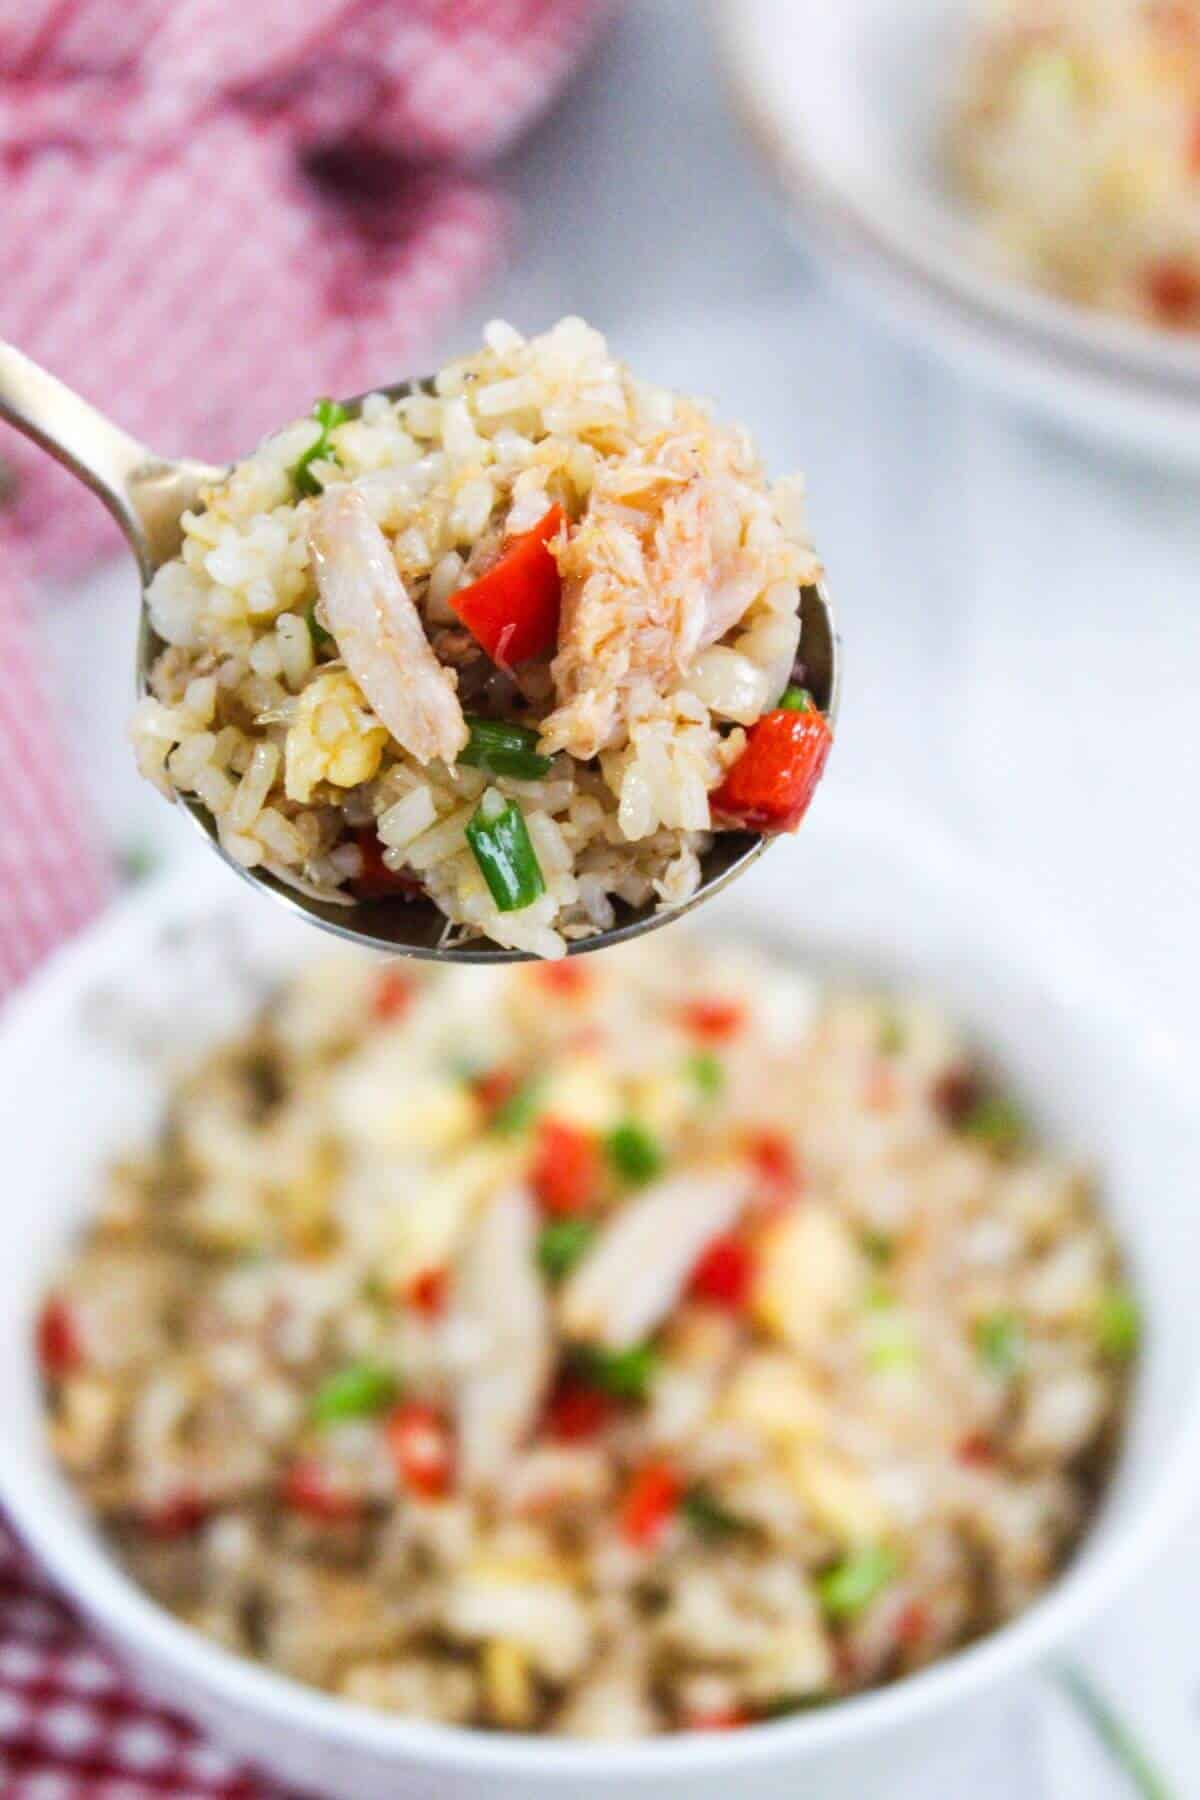 A spoonful of fried rice with crab and peppers.